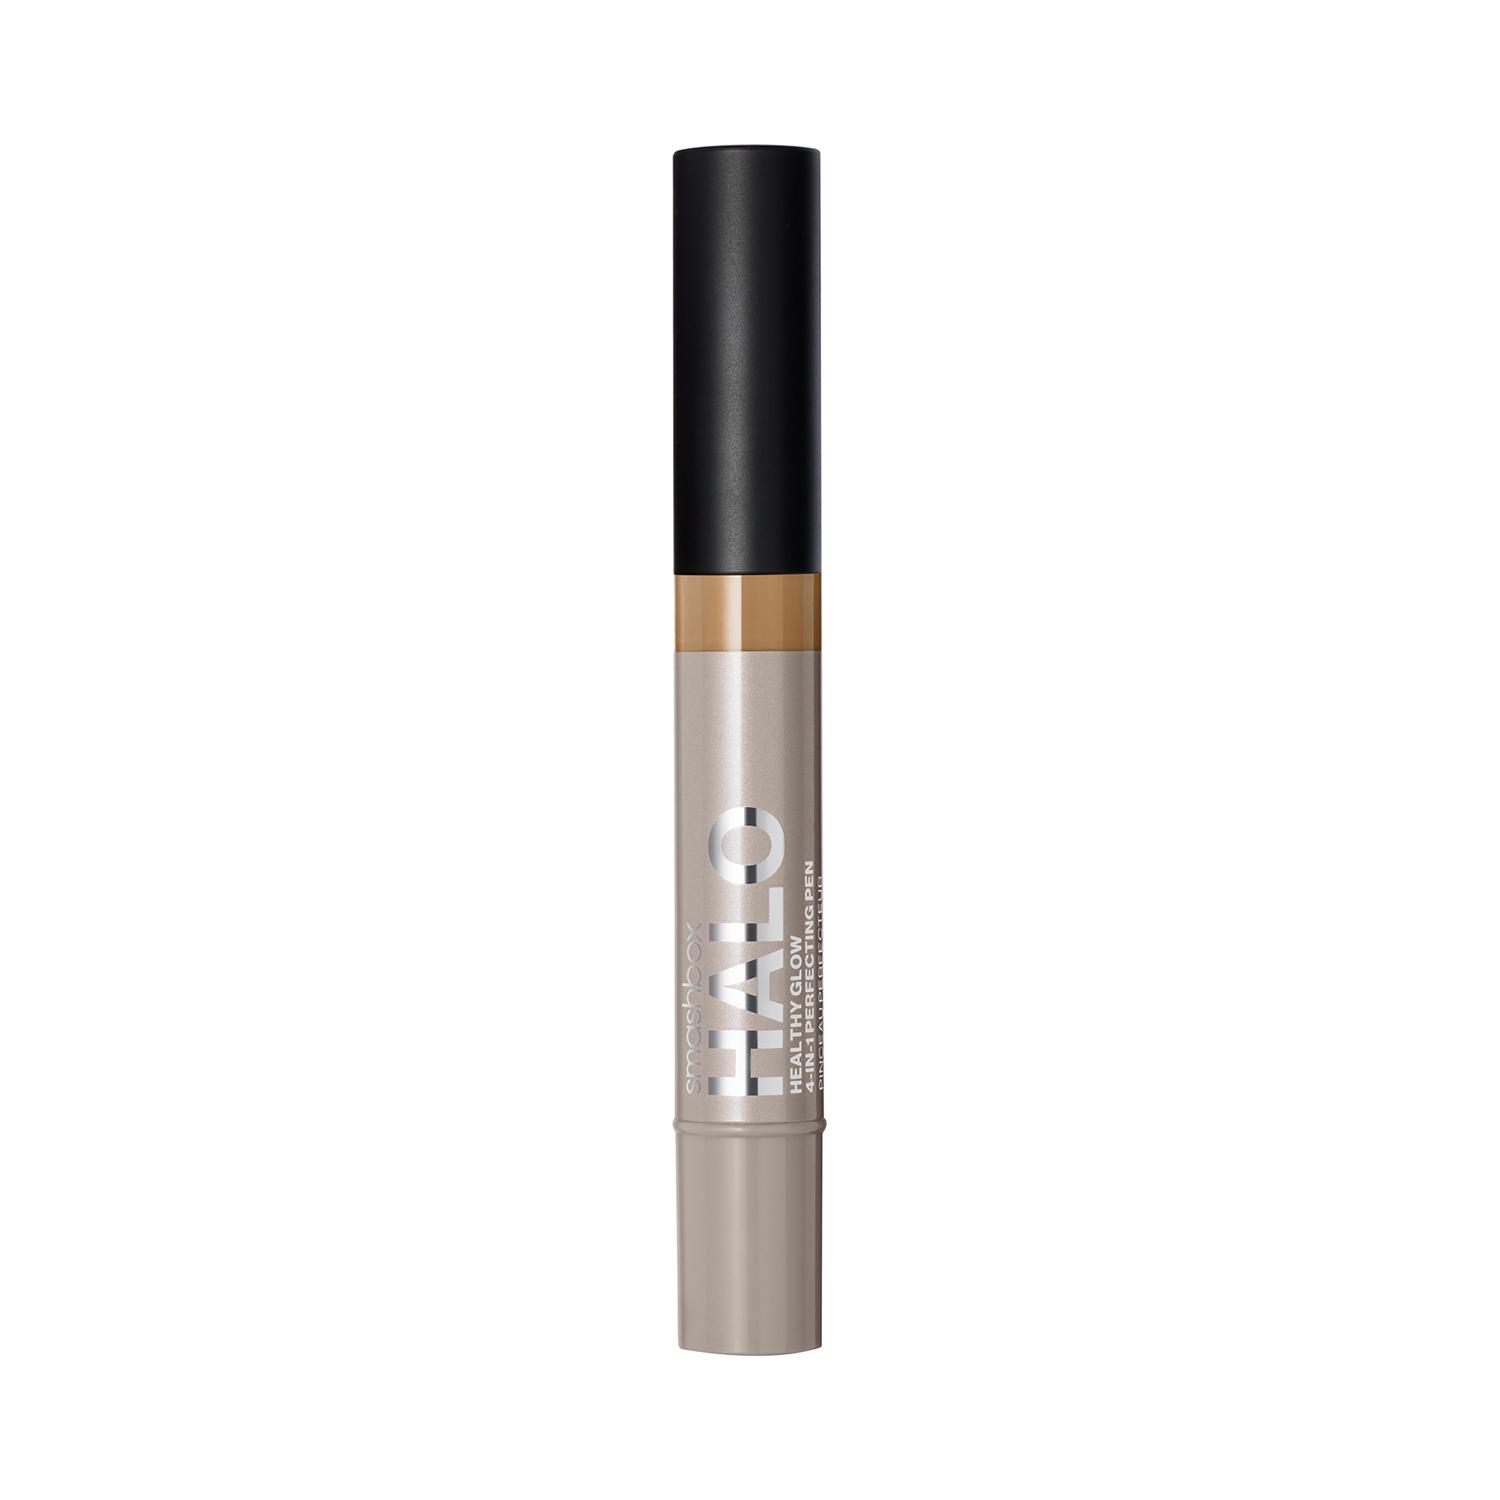 smashbox halo healthy glow 4-in-1 perfecting concealer pen - m20w (3.5ml)